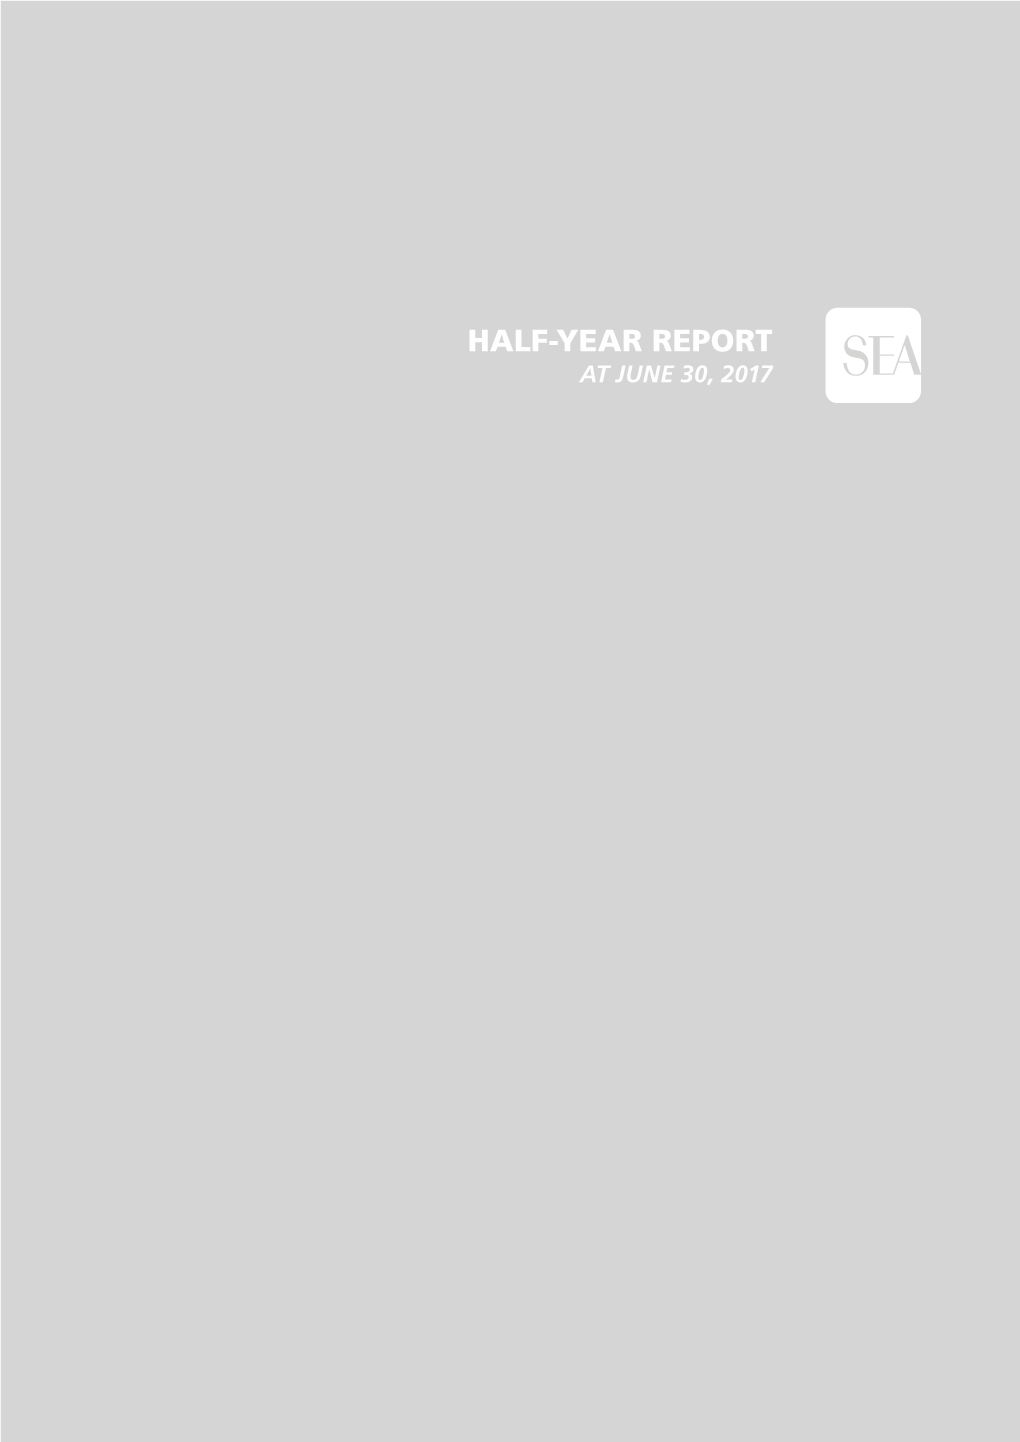 2017 HALF-YEAR REPORT at JUNE 30, 2017 the SEA Group’S Focus on Environmental Protection, Through the Adoption of Targeted Initiatives, Has Significantly